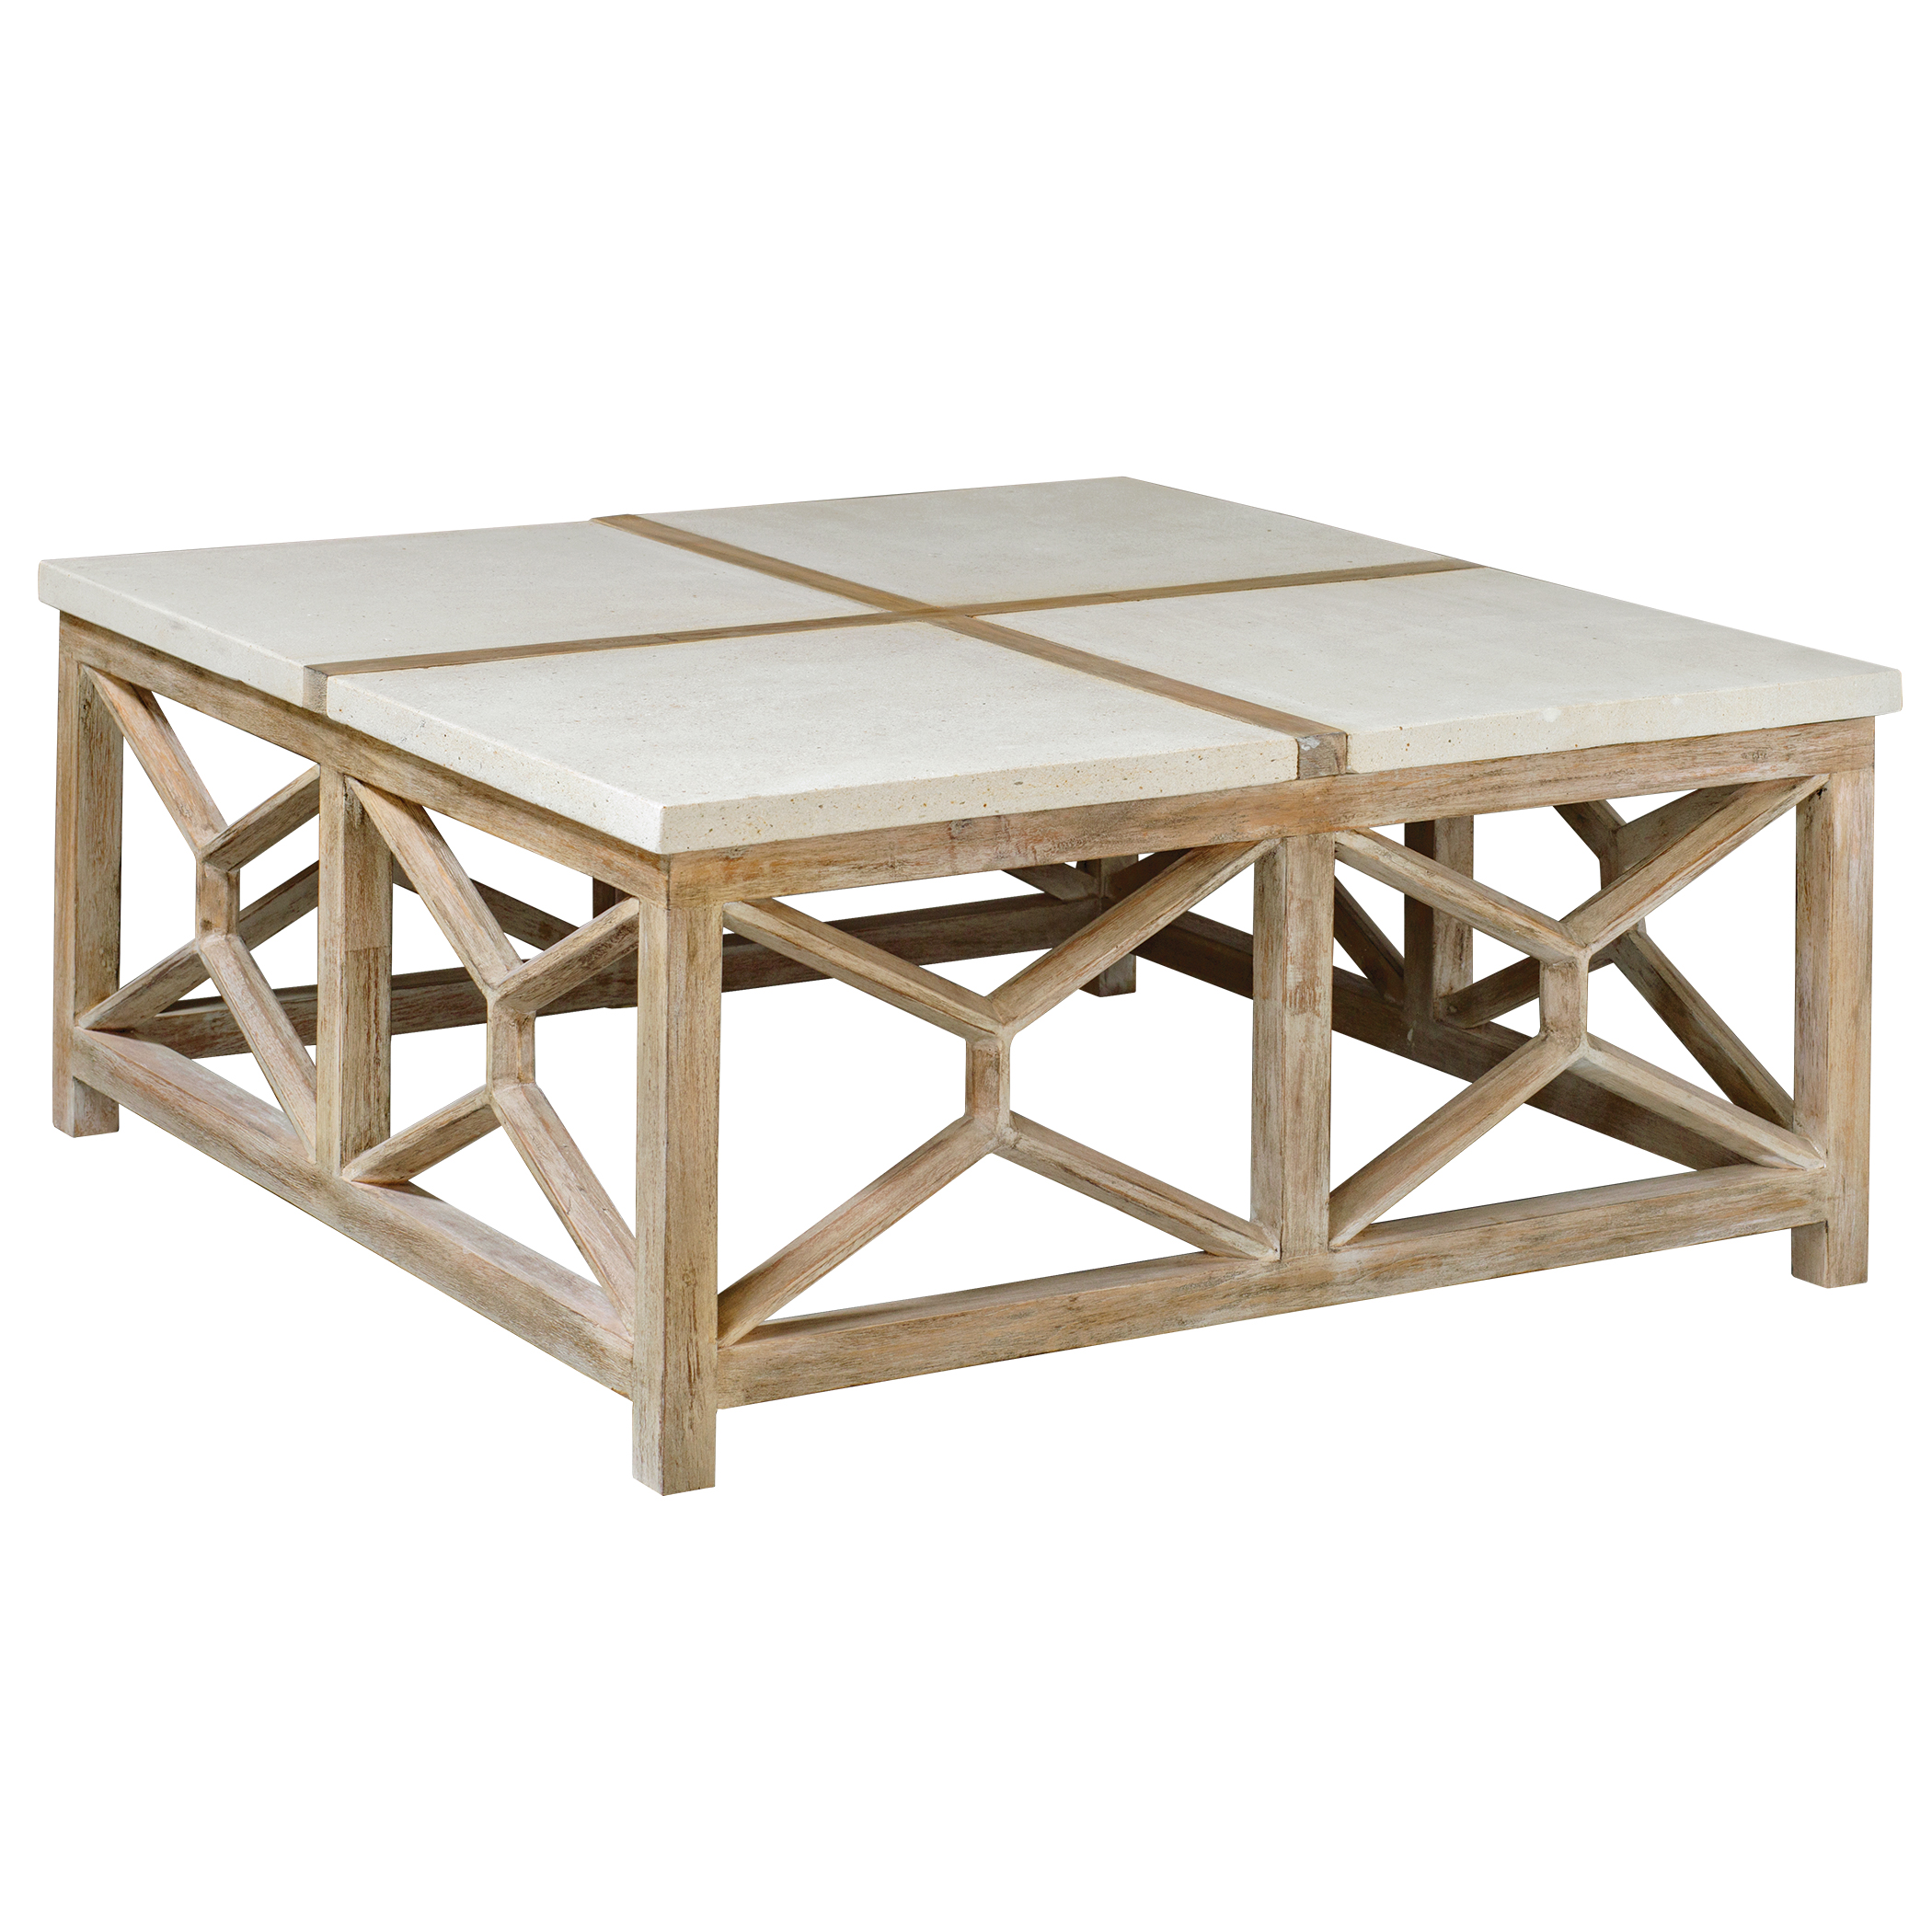 Online Designer Combined Living/Dining Catali Stone Coffee Table